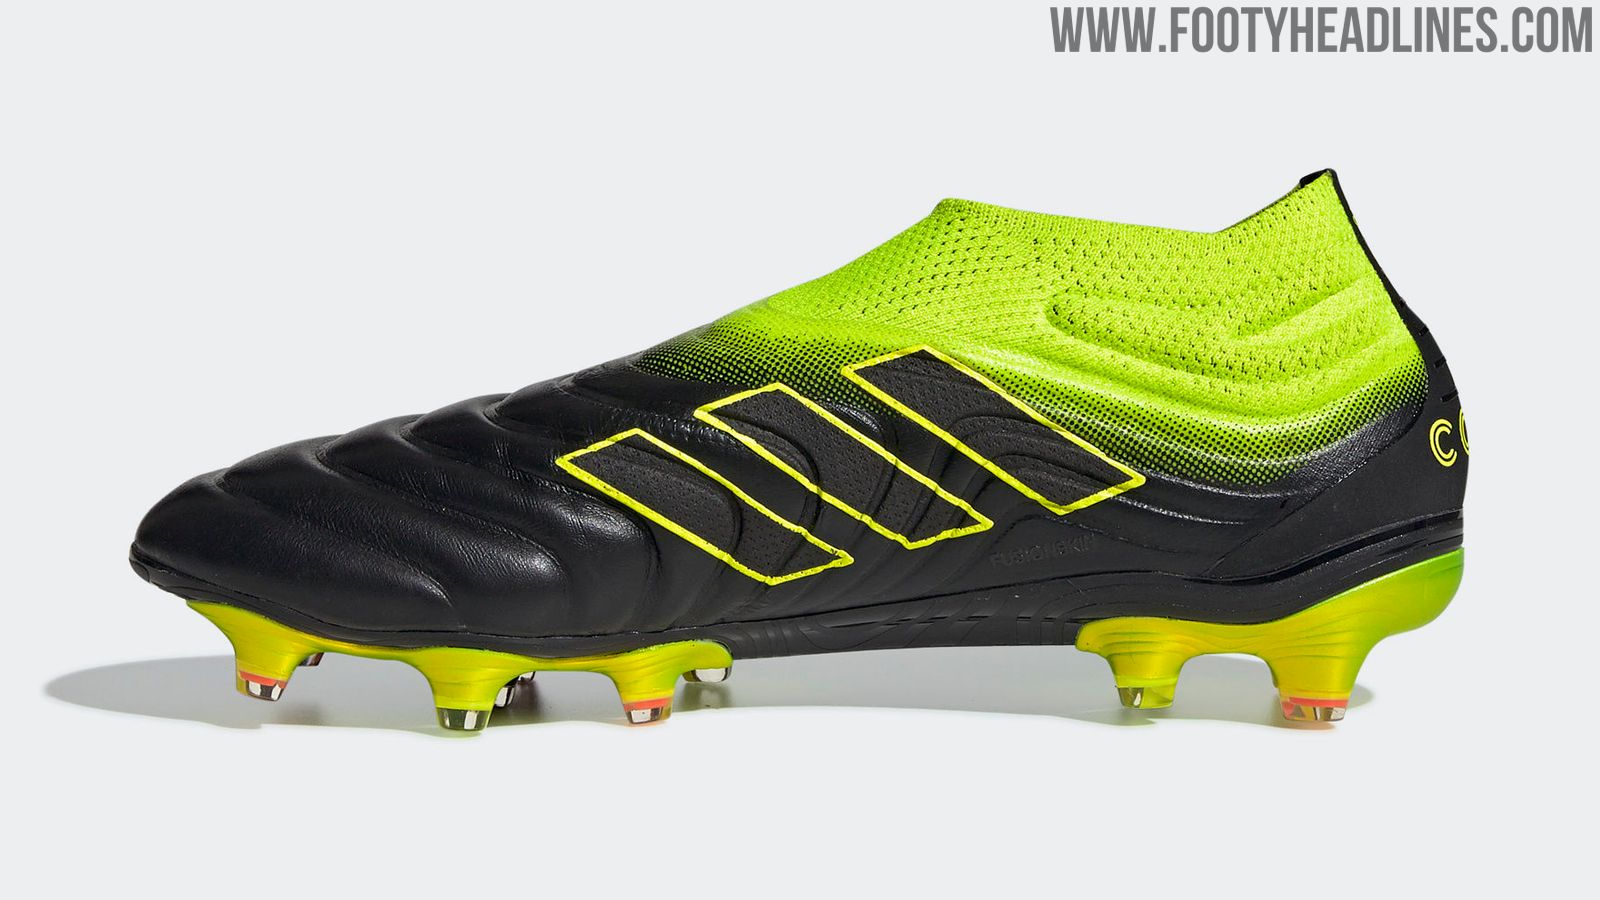 Black / Yellow Adidas Copa 19+ 'Exhibit Pack' Boots Released Footy